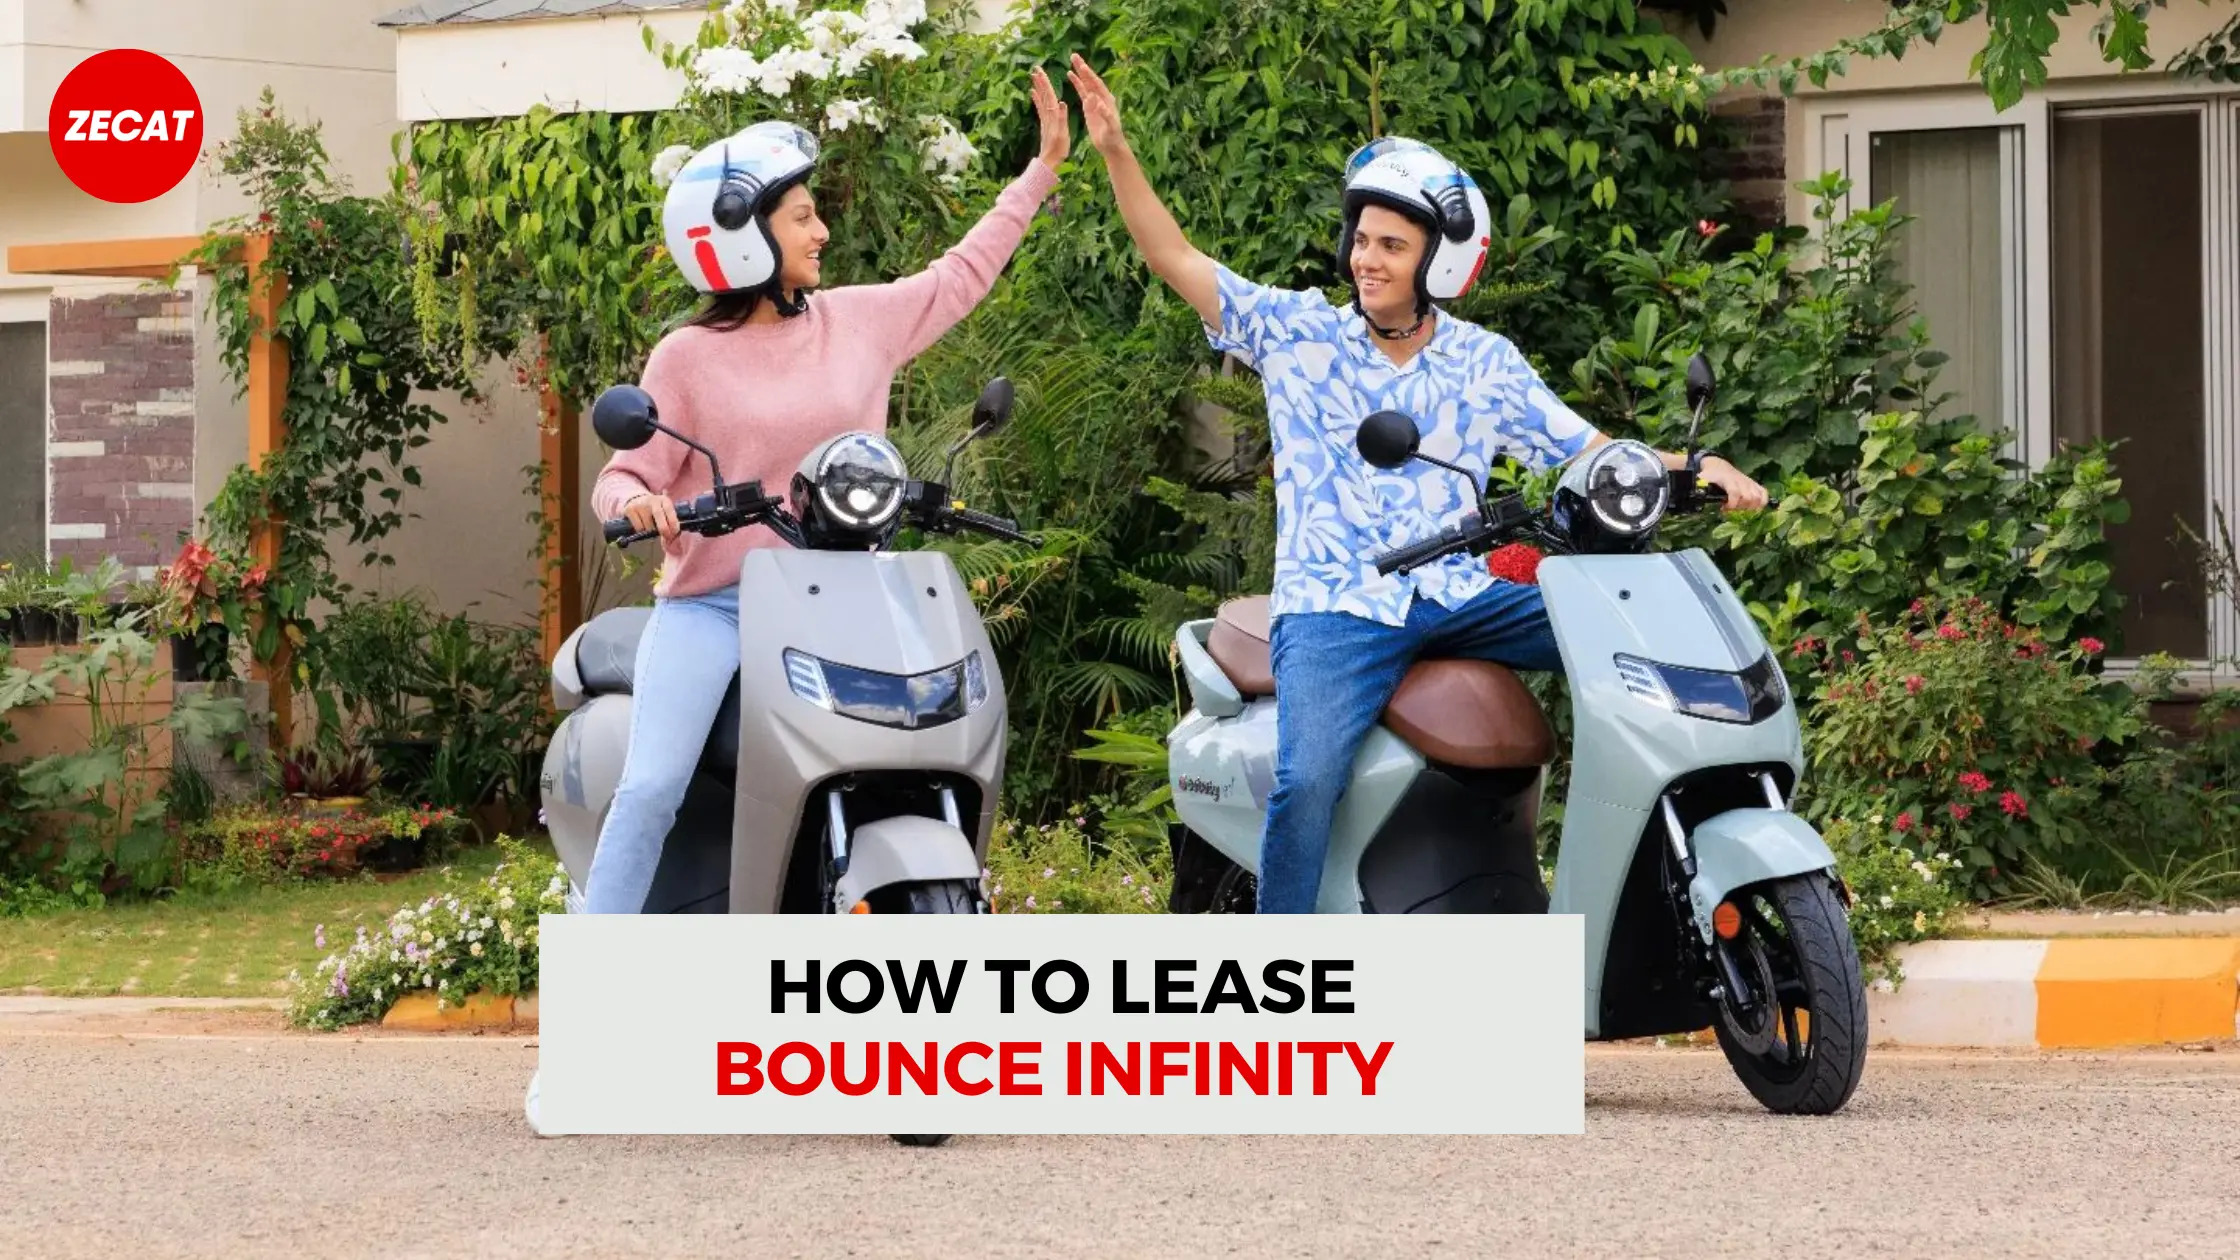 You are currently viewing Bounce Infinity on Lease | How to lease Bounce Infinity 2023